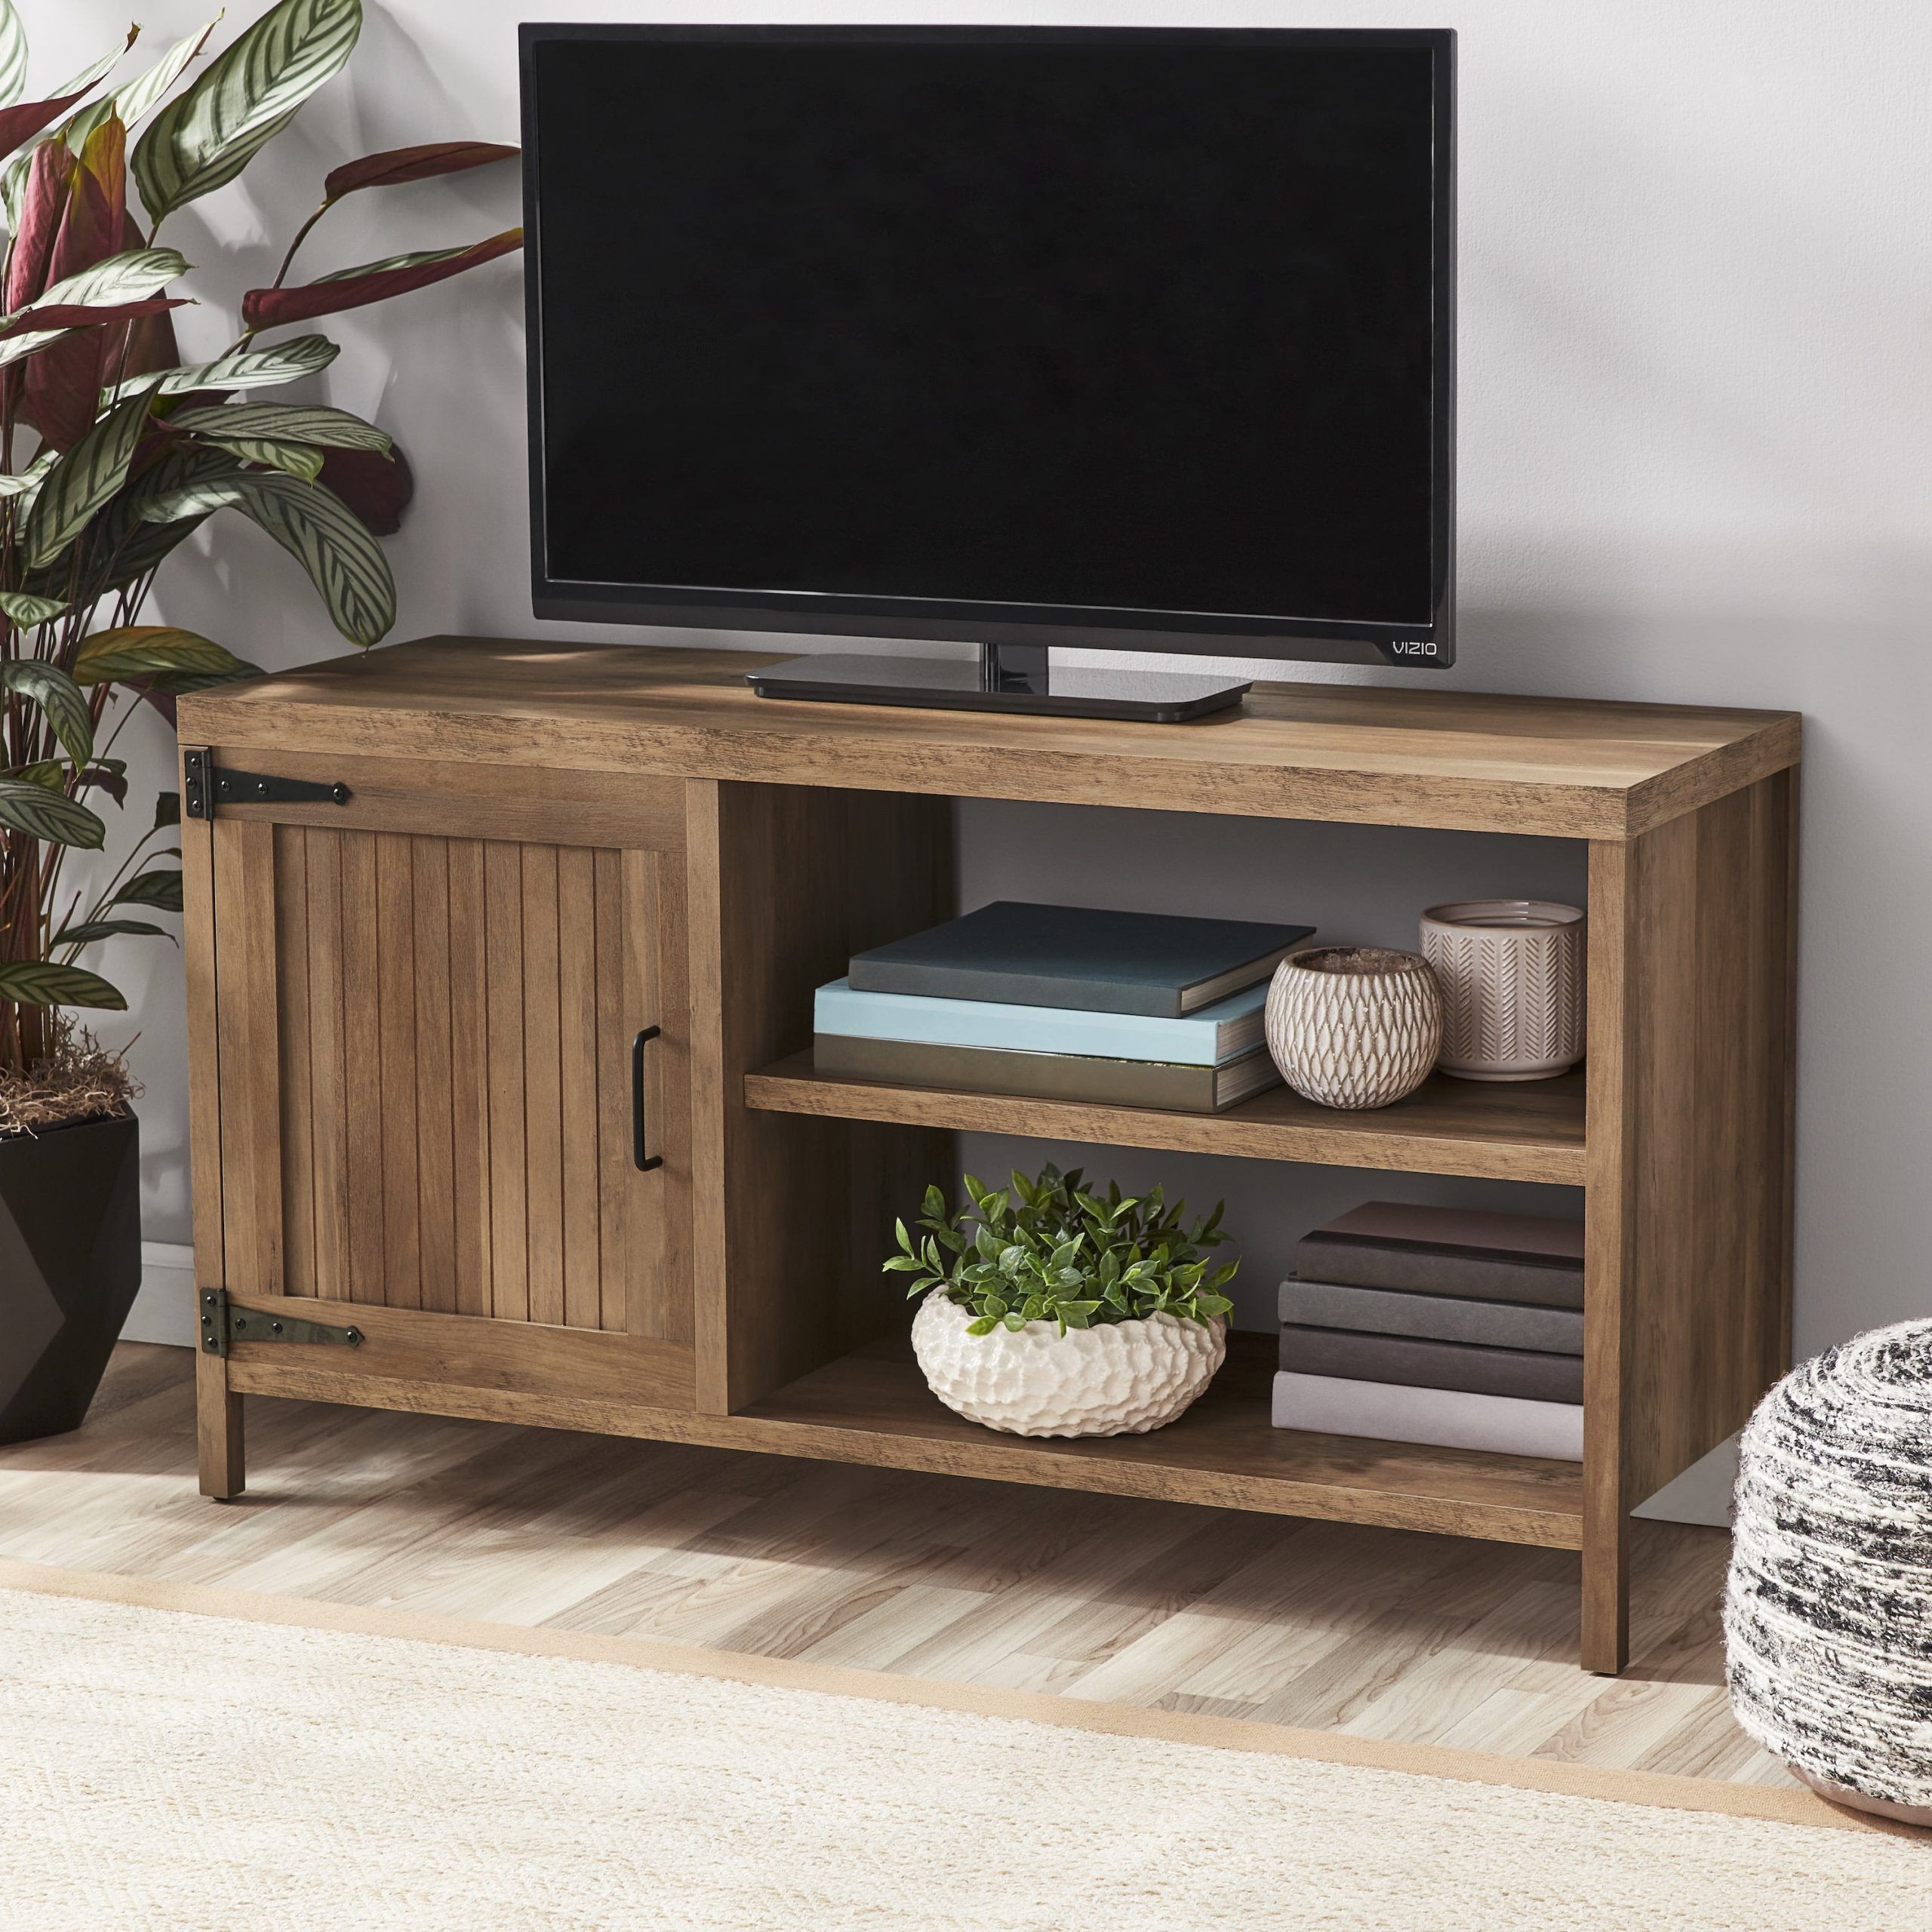 Mainstays Farmhouse Tv Stand For Tvs Up To 50", Rustic Weathered Oak Intended For Farmhouse Tv Stands (View 8 of 20)